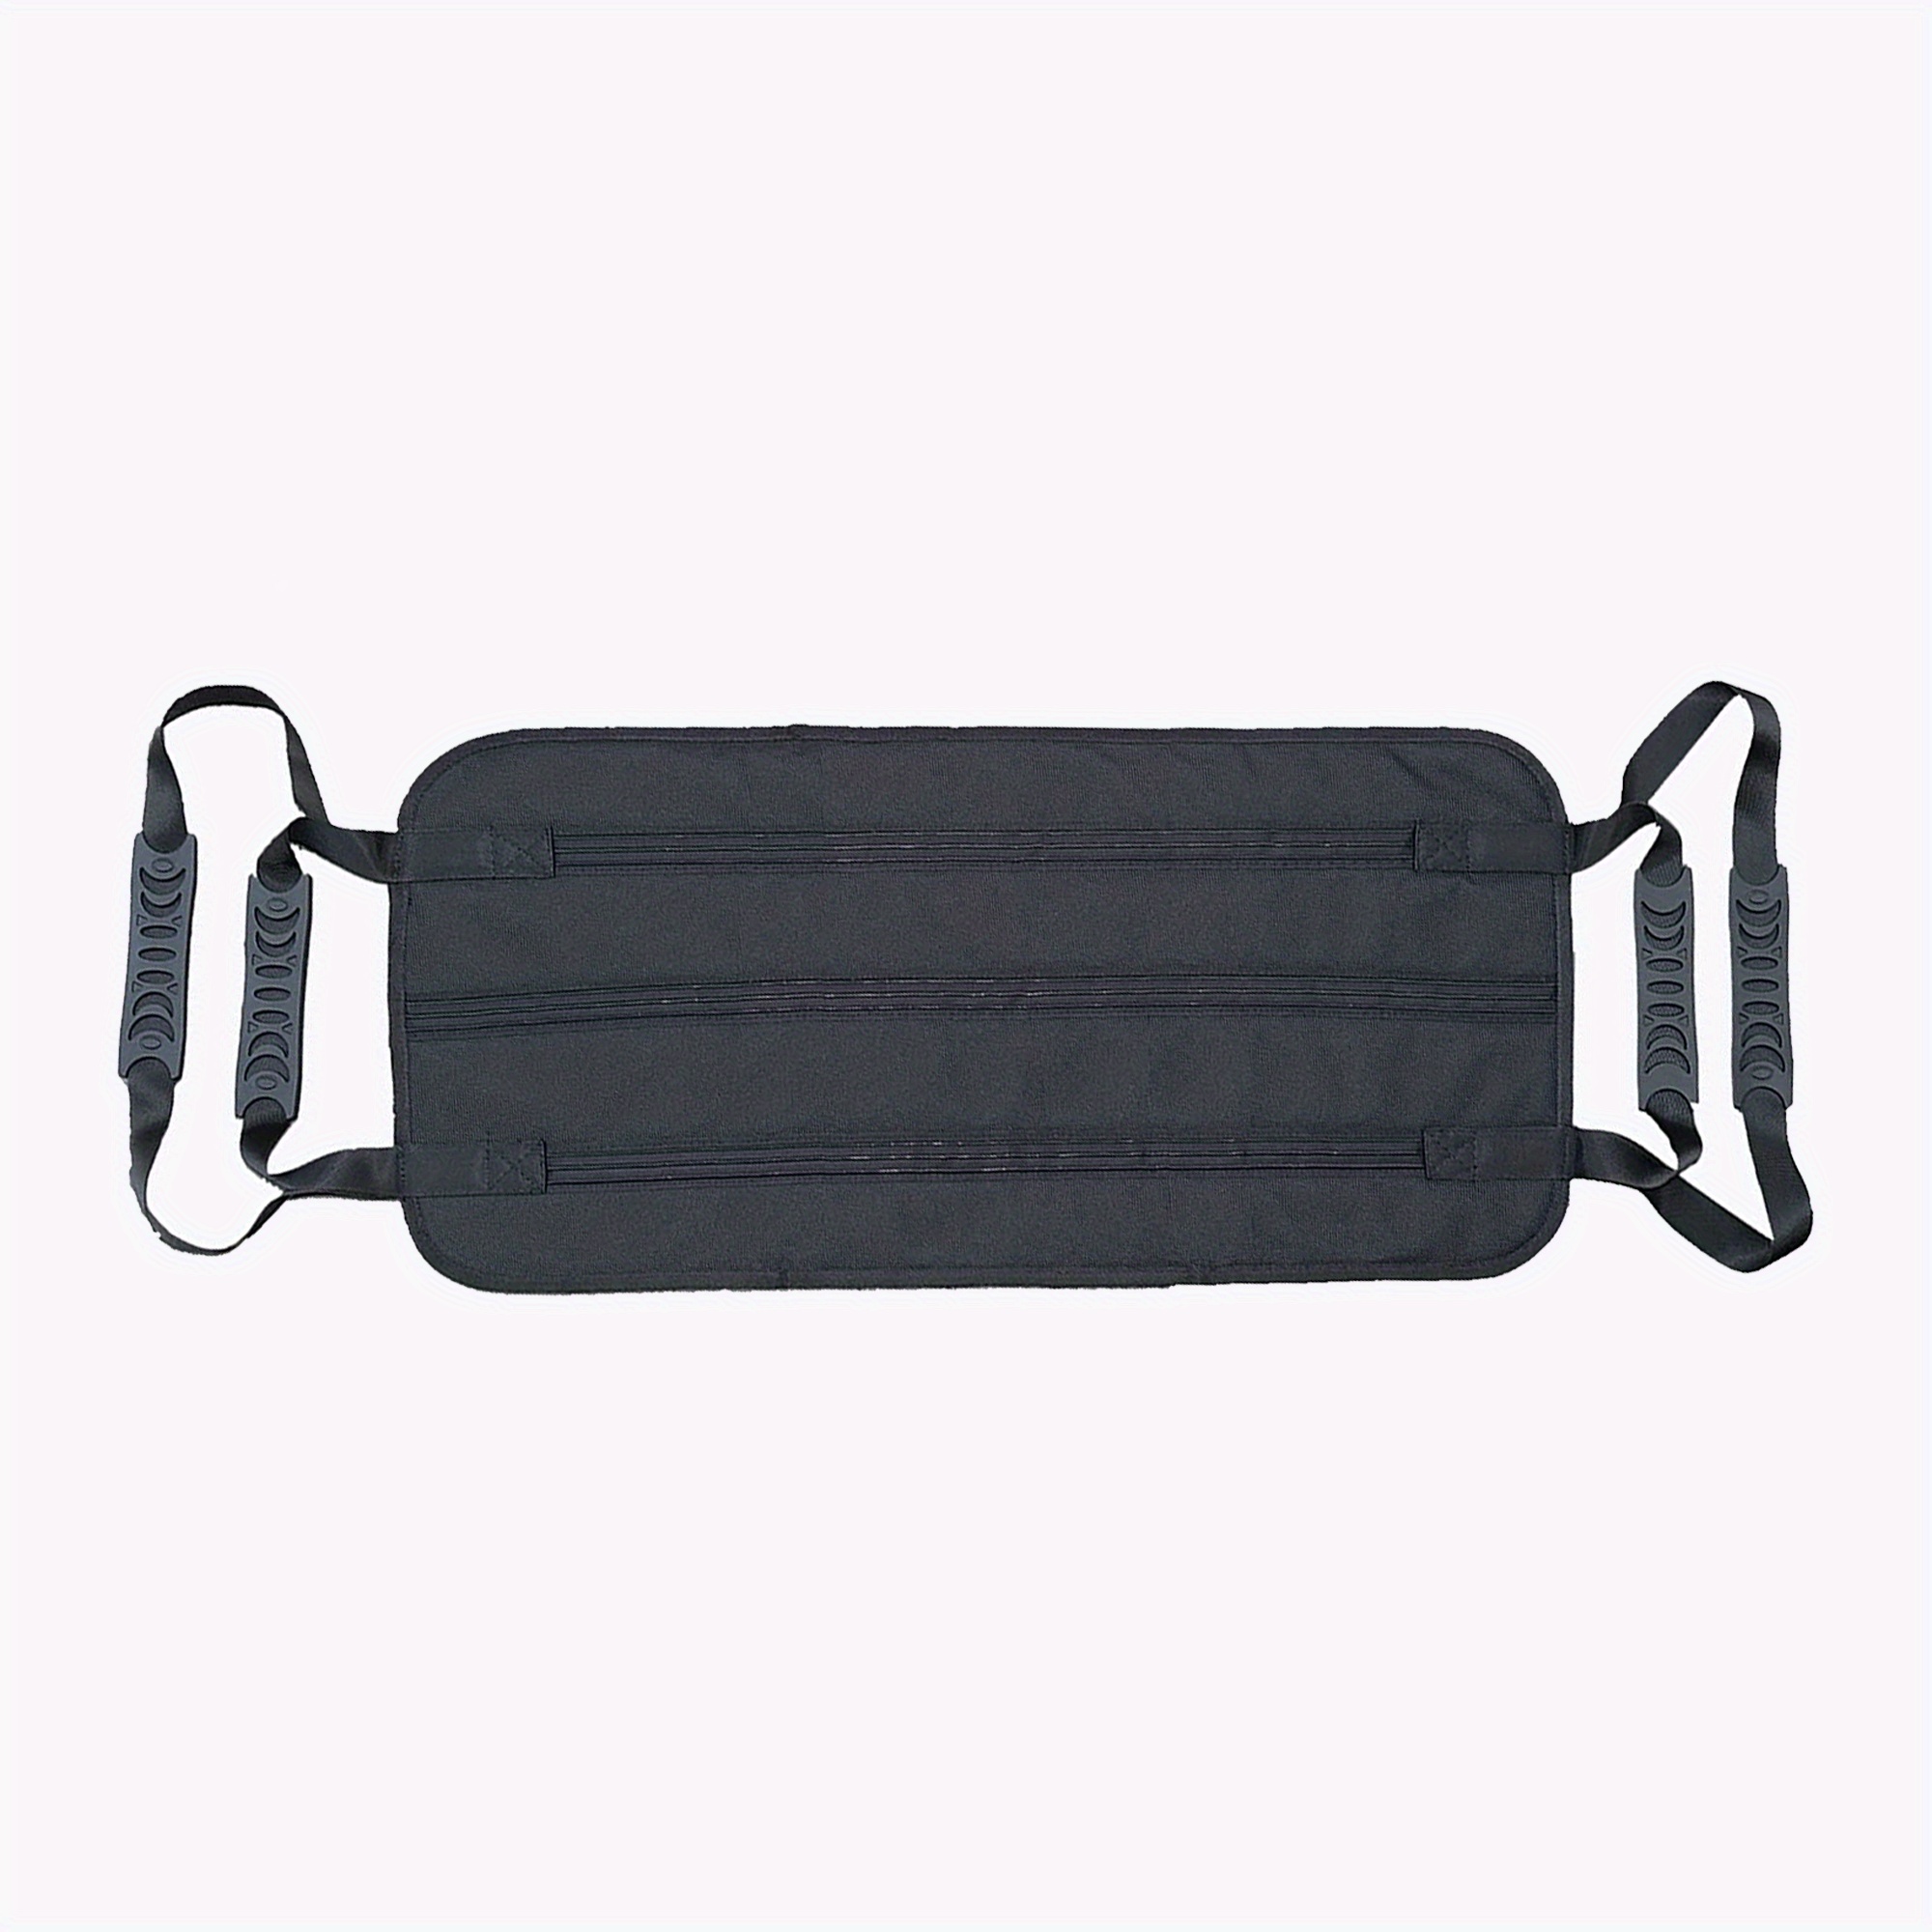 1pc Patient Padded Bed Transfer Nursing Sling, Safety Lift Aid Equipment  For Elderly, Patient Care Transfer Nursing Sling Handle Back Lifting  Activity